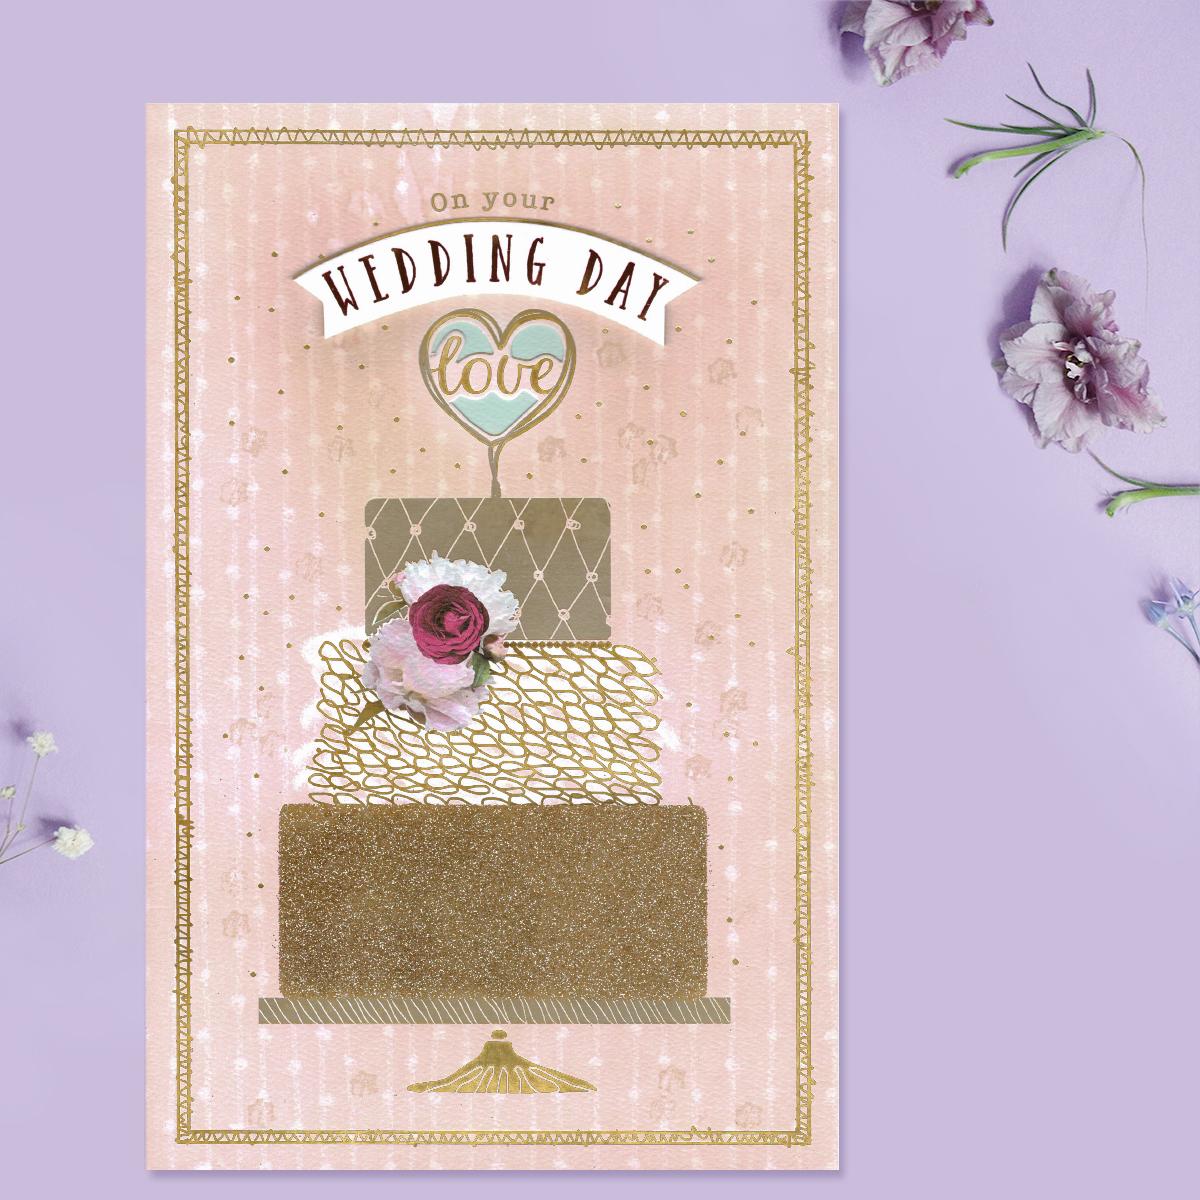 On Your Wedding Day Sparkly Cake Card Front Image